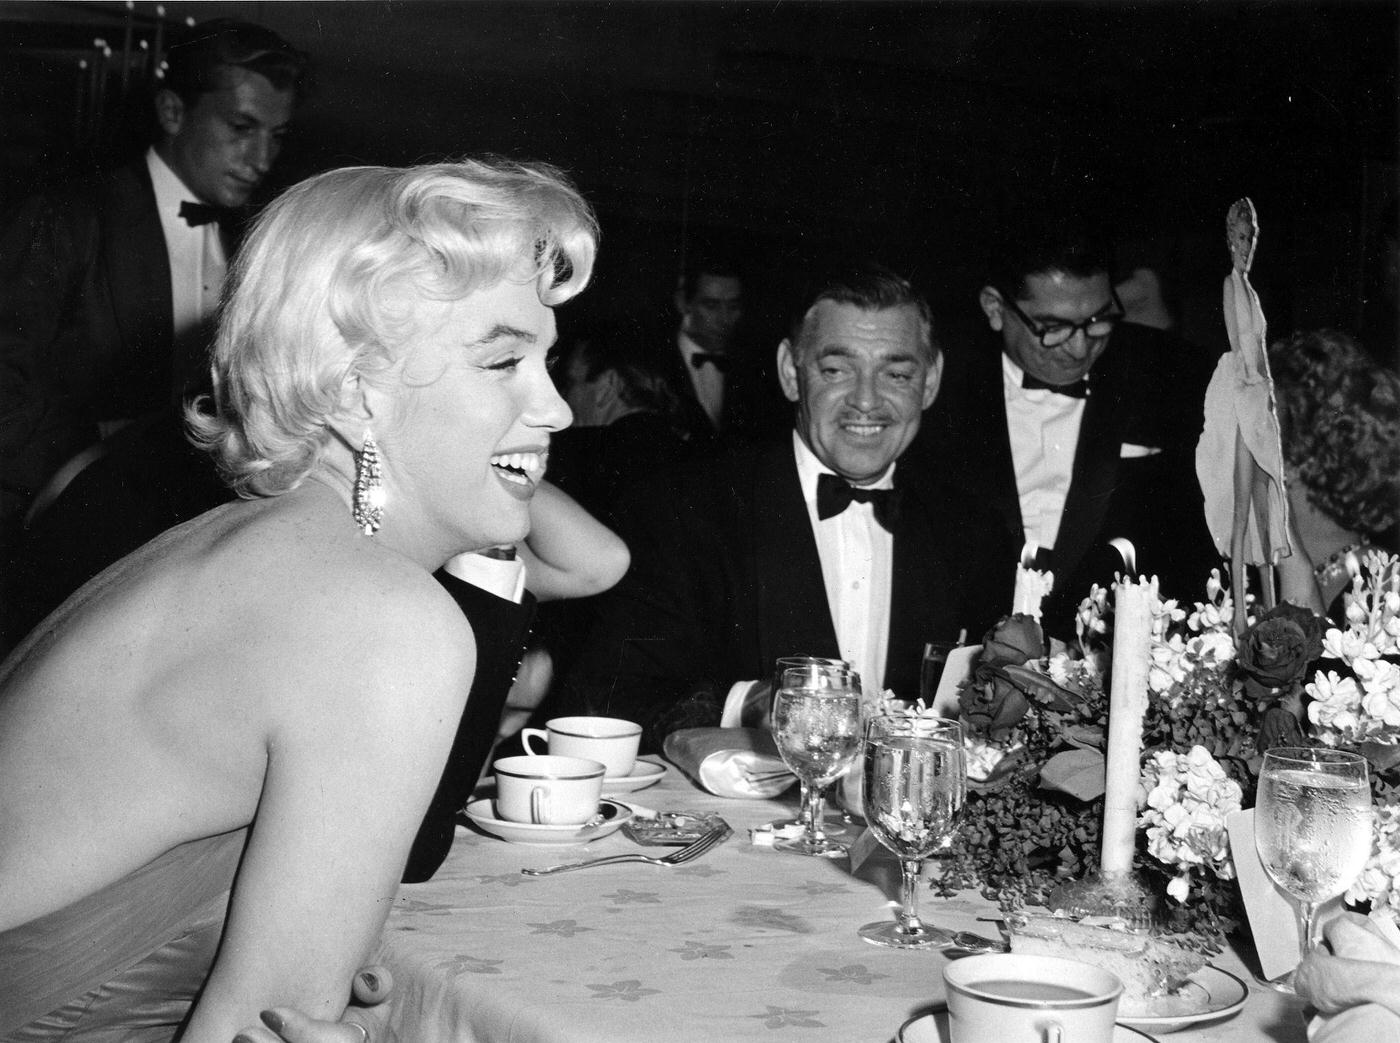 Marilyn Monroe with Clark Gable and newspaper columnist Sidney Skolsky at the wrap party for the filming of "The Seven Year Itch" at Romanoff's Restaurant in 1954